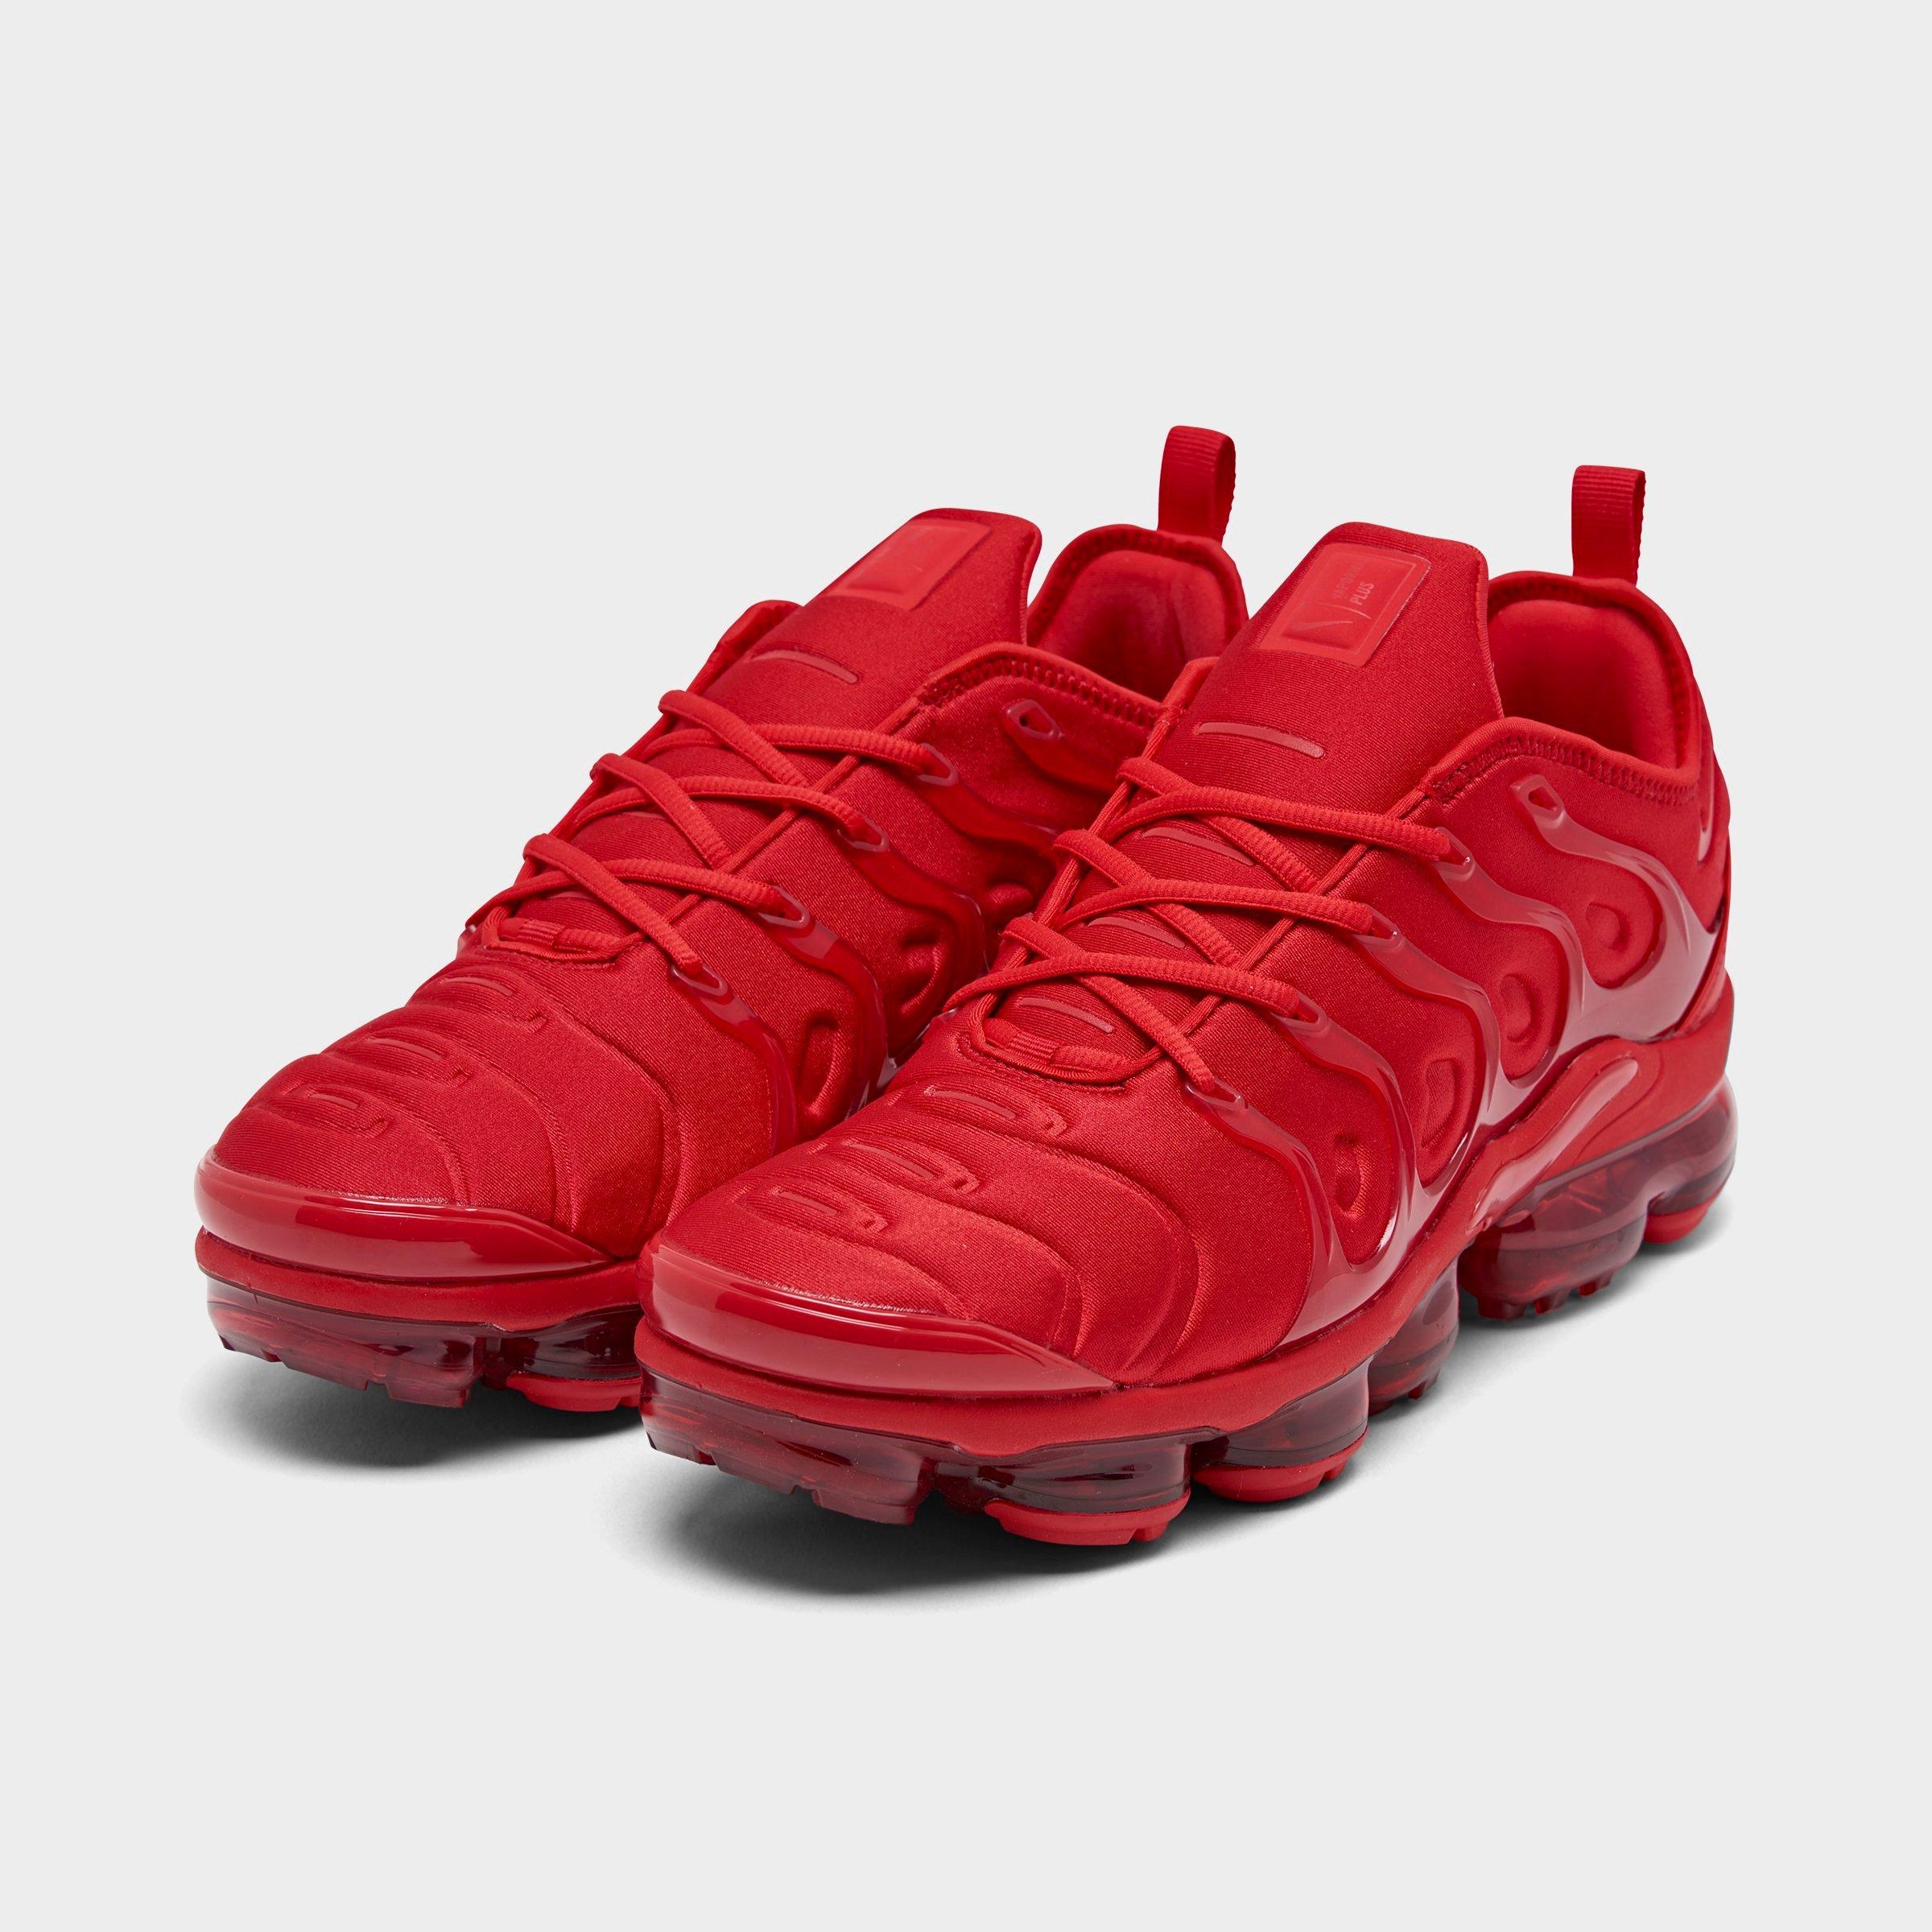 nike air vapormax plus running shoes red